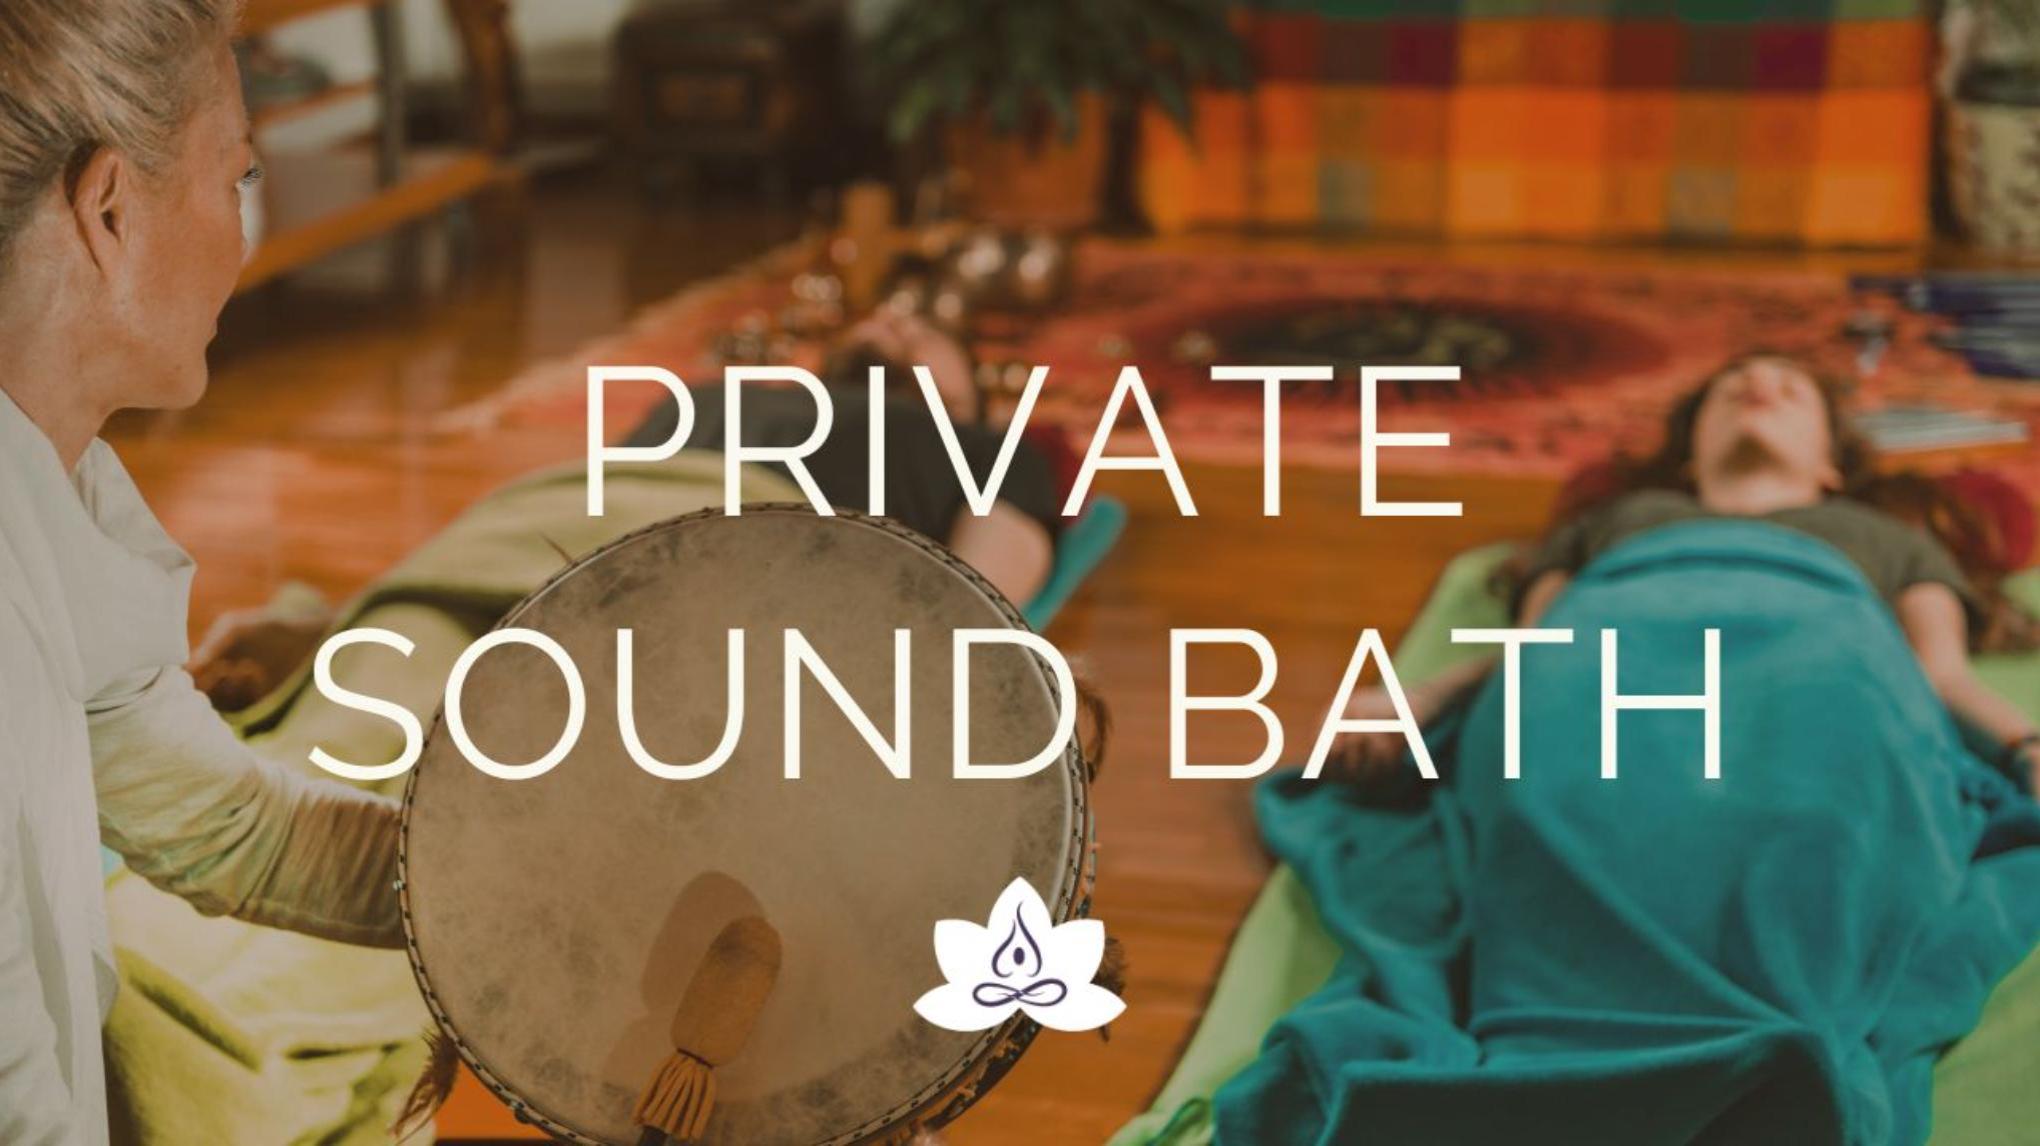 PRIVATE SOUND BATH: Reserve Your Own Private Group Sound Bath! Ask Me How!